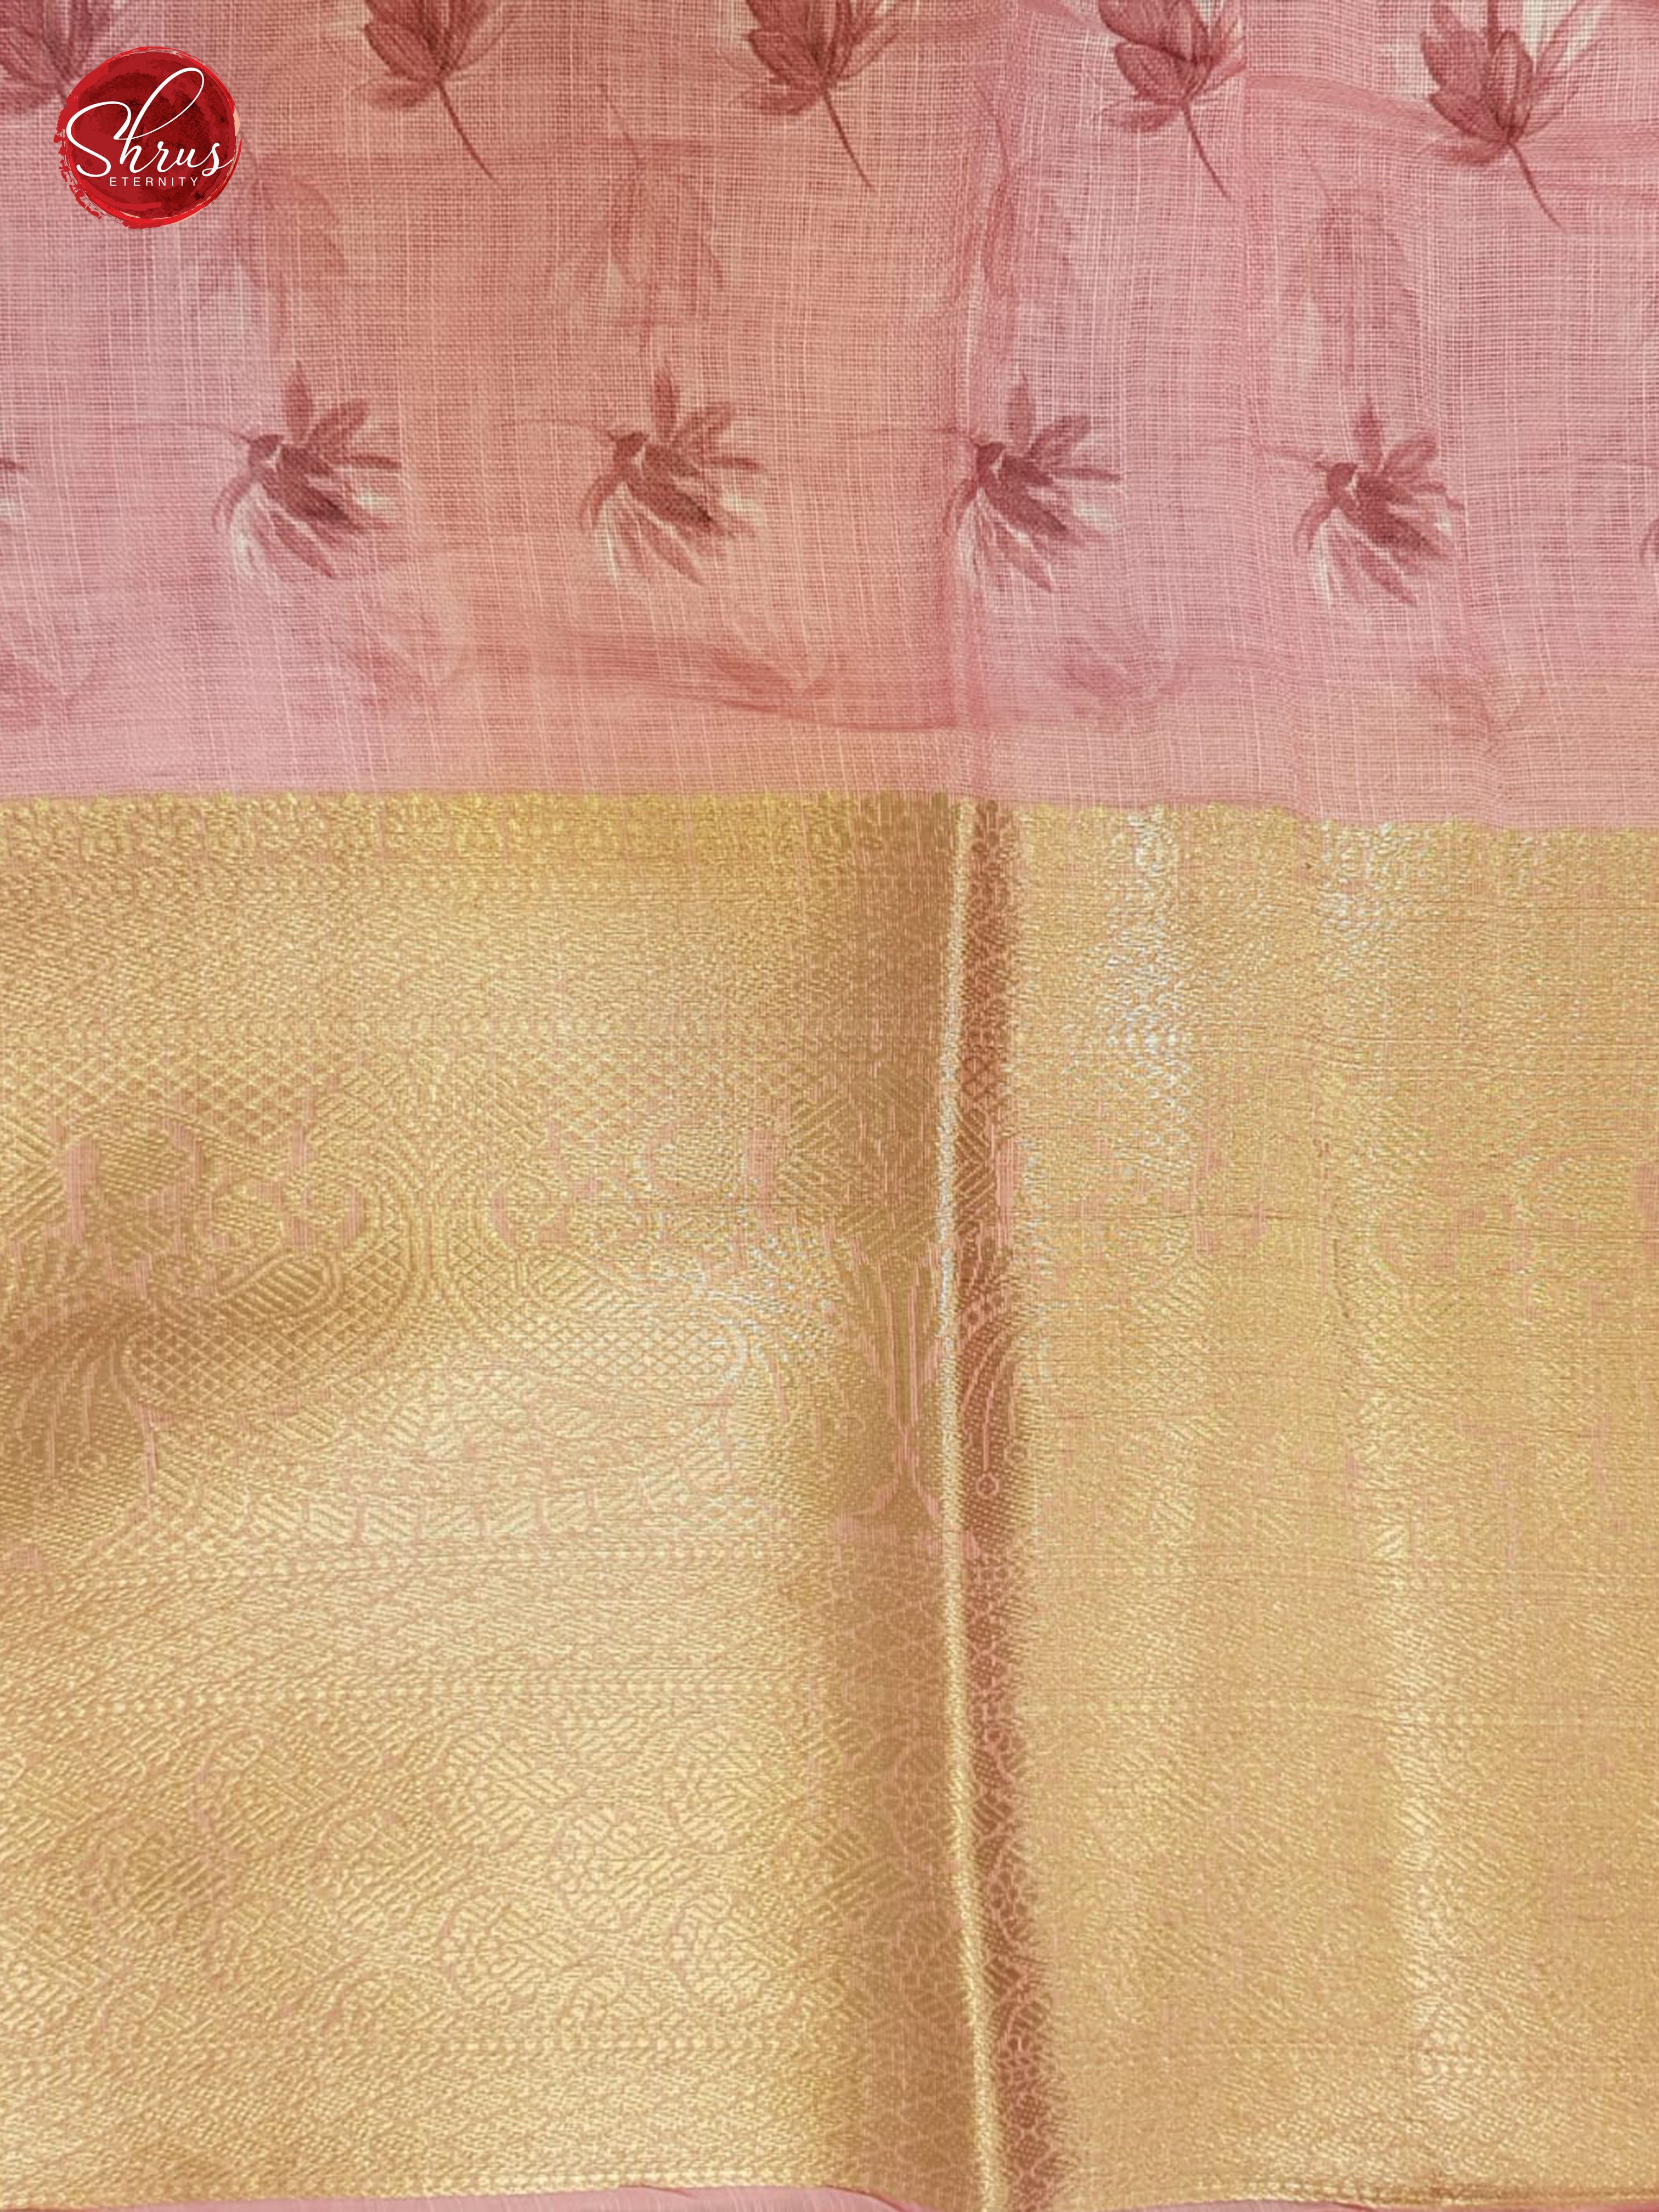 Grey & Pink - Matka Cotton with floral print on the Body &  contrast  zari  Border - Shop on ShrusEternity.com